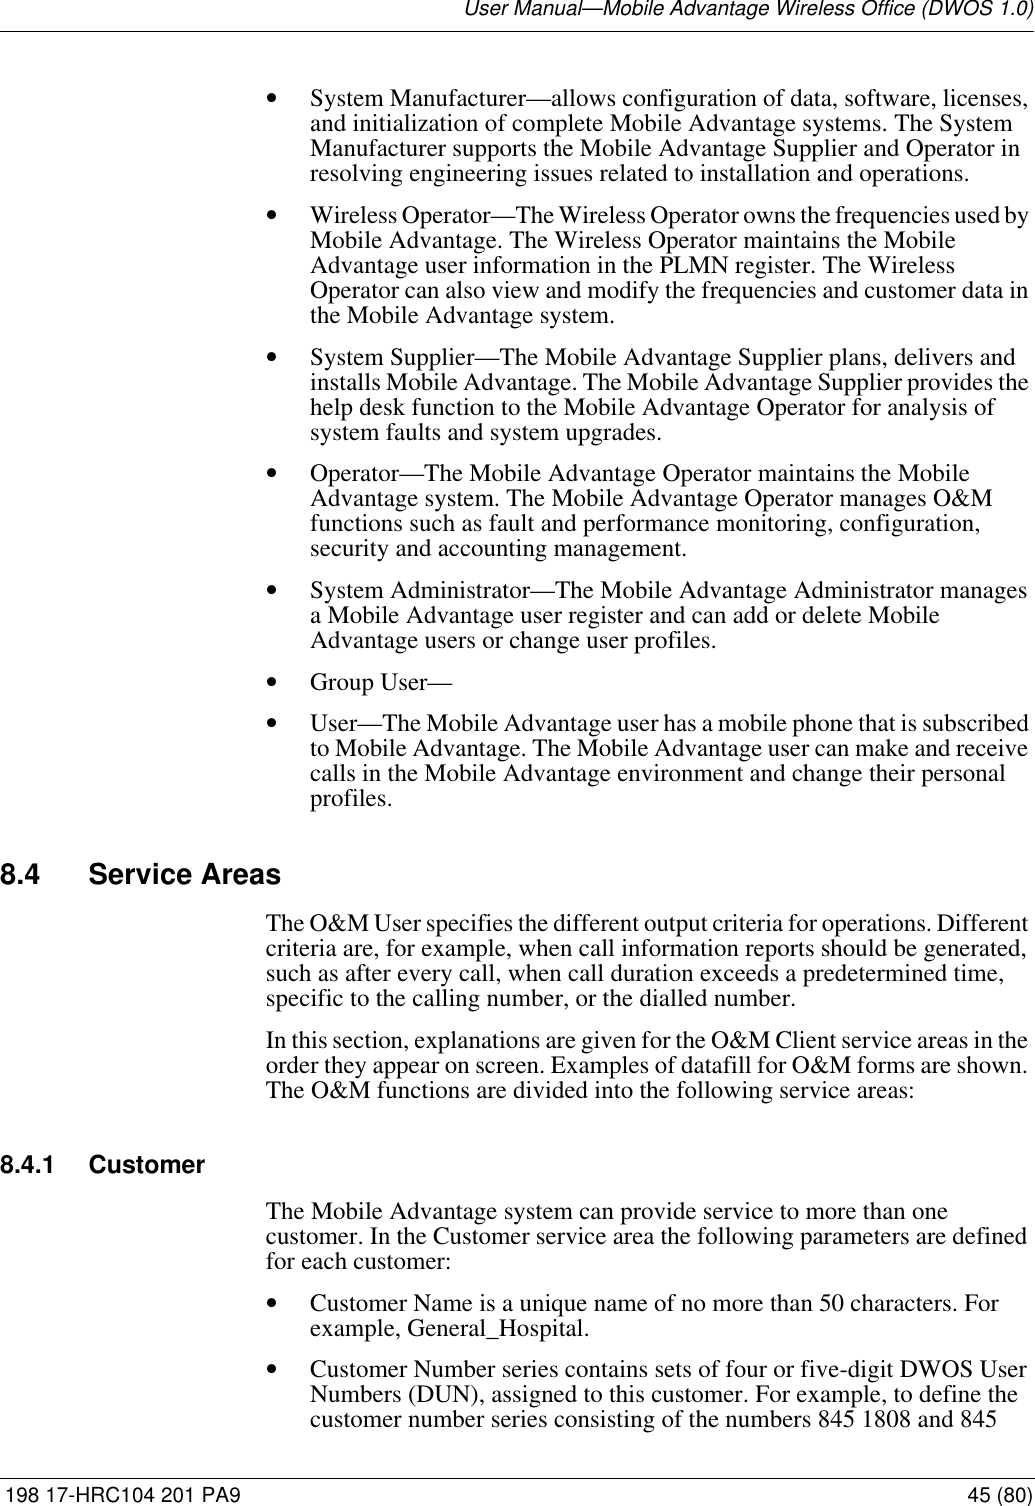 User Manual—Mobile Advantage Wireless Office (DWOS 1.0) 198 17-HRC104 201 PA9 45 (80)•System Manufacturer—allows configuration of data, software, licenses, and initialization of complete Mobile Advantage systems. The System Manufacturer supports the Mobile Advantage Supplier and Operator in resolving engineering issues related to installation and operations.•Wireless Operator—The Wireless Operator owns the frequencies used by Mobile Advantage. The Wireless Operator maintains the Mobile Advantage user information in the PLMN register. The Wireless Operator can also view and modify the frequencies and customer data in the Mobile Advantage system.•System Supplier—The Mobile Advantage Supplier plans, delivers and installs Mobile Advantage. The Mobile Advantage Supplier provides the help desk function to the Mobile Advantage Operator for analysis of system faults and system upgrades.•Operator—The Mobile Advantage Operator maintains the Mobile Advantage system. The Mobile Advantage Operator manages O&amp;M functions such as fault and performance monitoring, configuration, security and accounting management. •System Administrator—The Mobile Advantage Administrator manages a Mobile Advantage user register and can add or delete Mobile Advantage users or change user profiles.•Group User—•User—The Mobile Advantage user has a mobile phone that is subscribed to Mobile Advantage. The Mobile Advantage user can make and receive calls in the Mobile Advantage environment and change their personal profiles.8.4 Service AreasThe O&amp;M User specifies the different output criteria for operations. Different criteria are, for example, when call information reports should be generated, such as after every call, when call duration exceeds a predetermined time, specific to the calling number, or the dialled number. In this section, explanations are given for the O&amp;M Client service areas in the order they appear on screen. Examples of datafill for O&amp;M forms are shown. The O&amp;M functions are divided into the following service areas:8.4.1 CustomerThe Mobile Advantage system can provide service to more than one customer. In the Customer service area the following parameters are defined for each customer:•Customer Name is a unique name of no more than 50 characters. For example, General_Hospital.•Customer Number series contains sets of four or five-digit DWOS User Numbers (DUN), assigned to this customer. For example, to define the customer number series consisting of the numbers 845 1808 and 845 